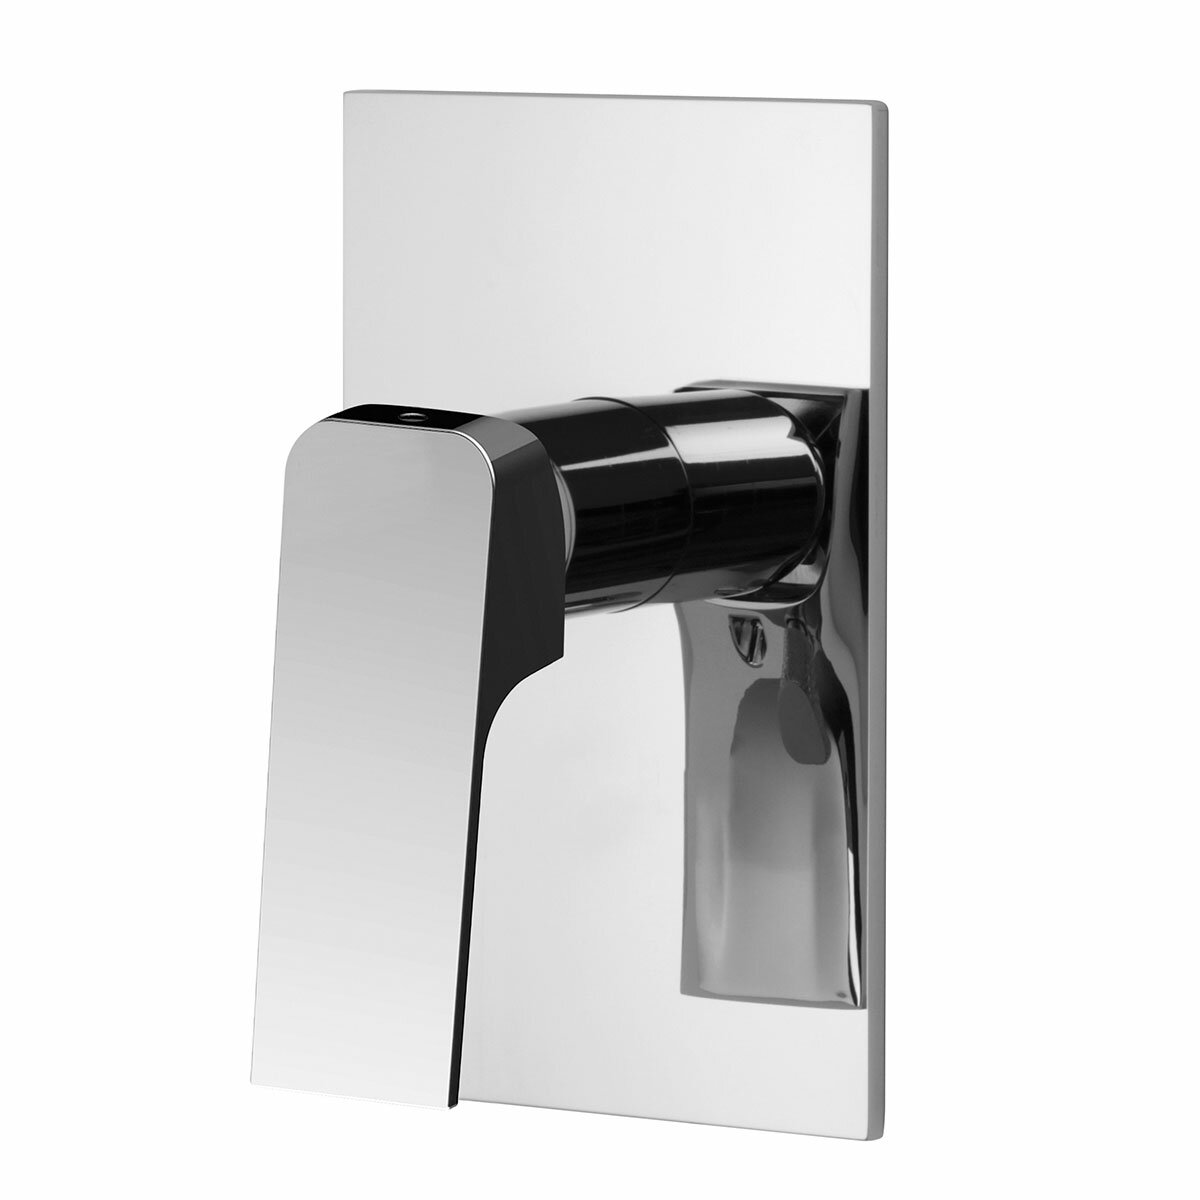 Fima Carlo Frattini Fit Series shower mixer built-in and without diverter; outside part only.